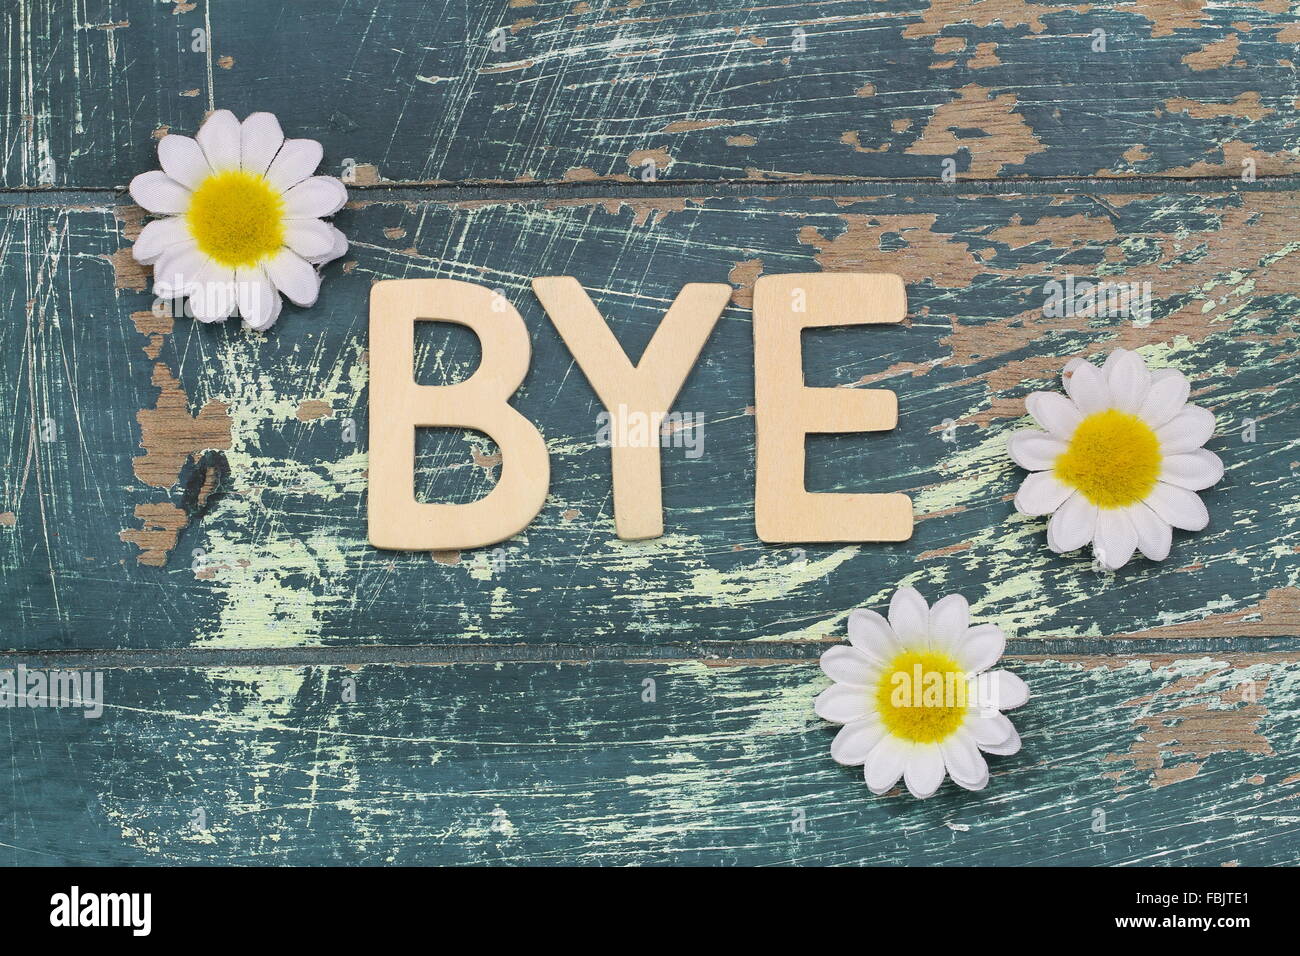 Word bye written with wooden letters on rustic surface and white daisies Stock Photo